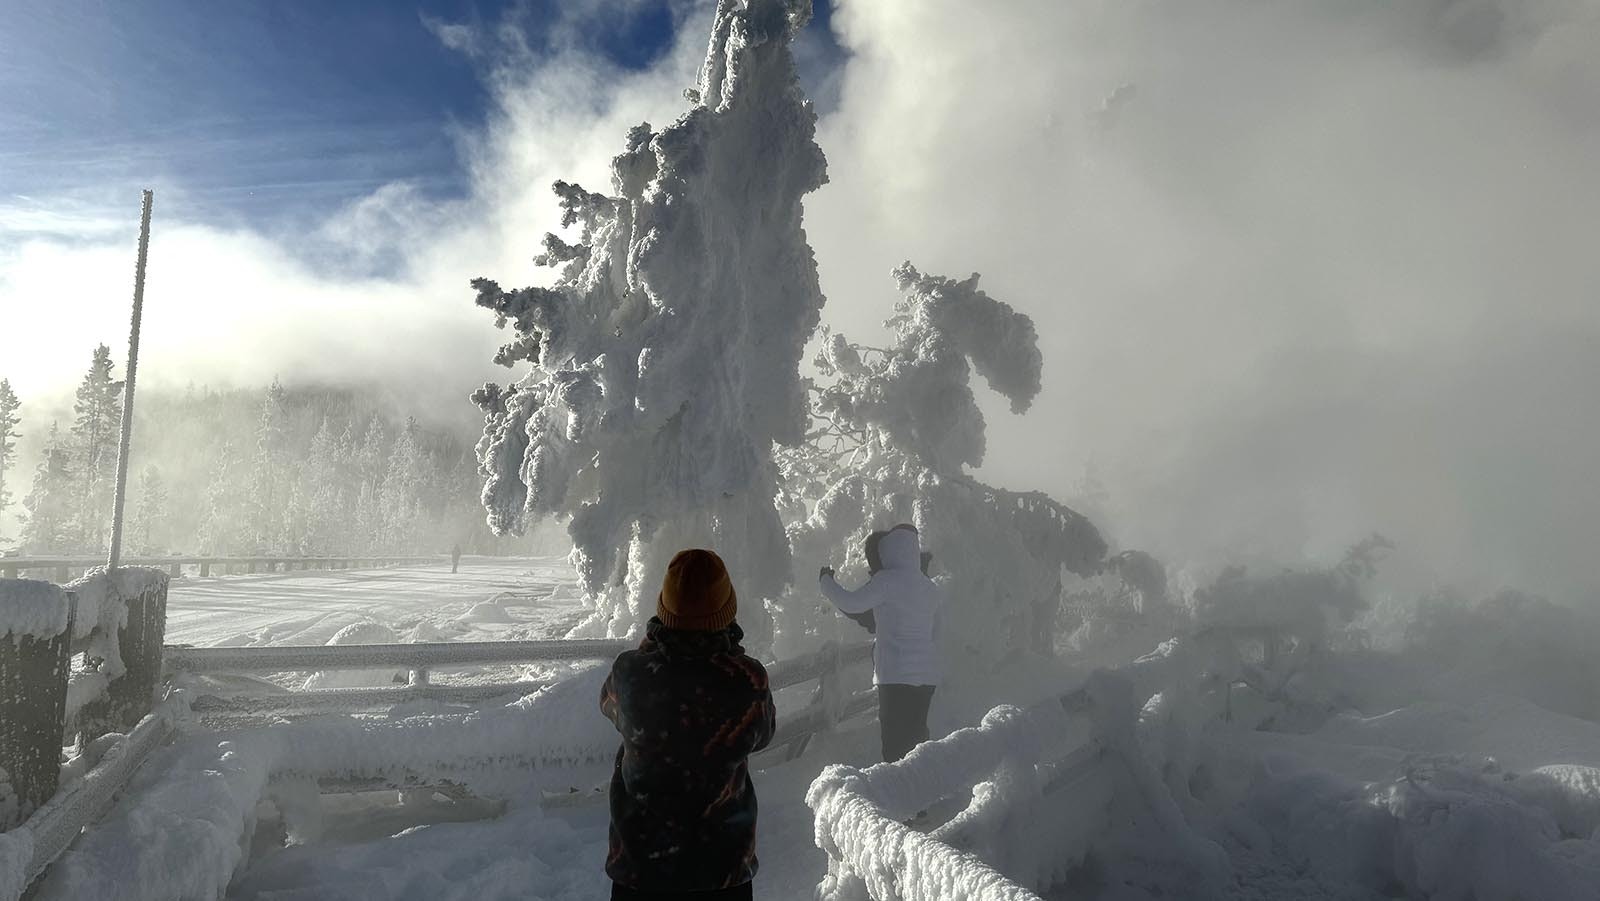 A snowcoach passenger takes a photo of "rime ice" covering the trees and boardwalks in Yellowstone National Park. Rime ice forms when supercooled water droplets freeze onto whatever surface they contact, one of the many unique winter sights in the park.